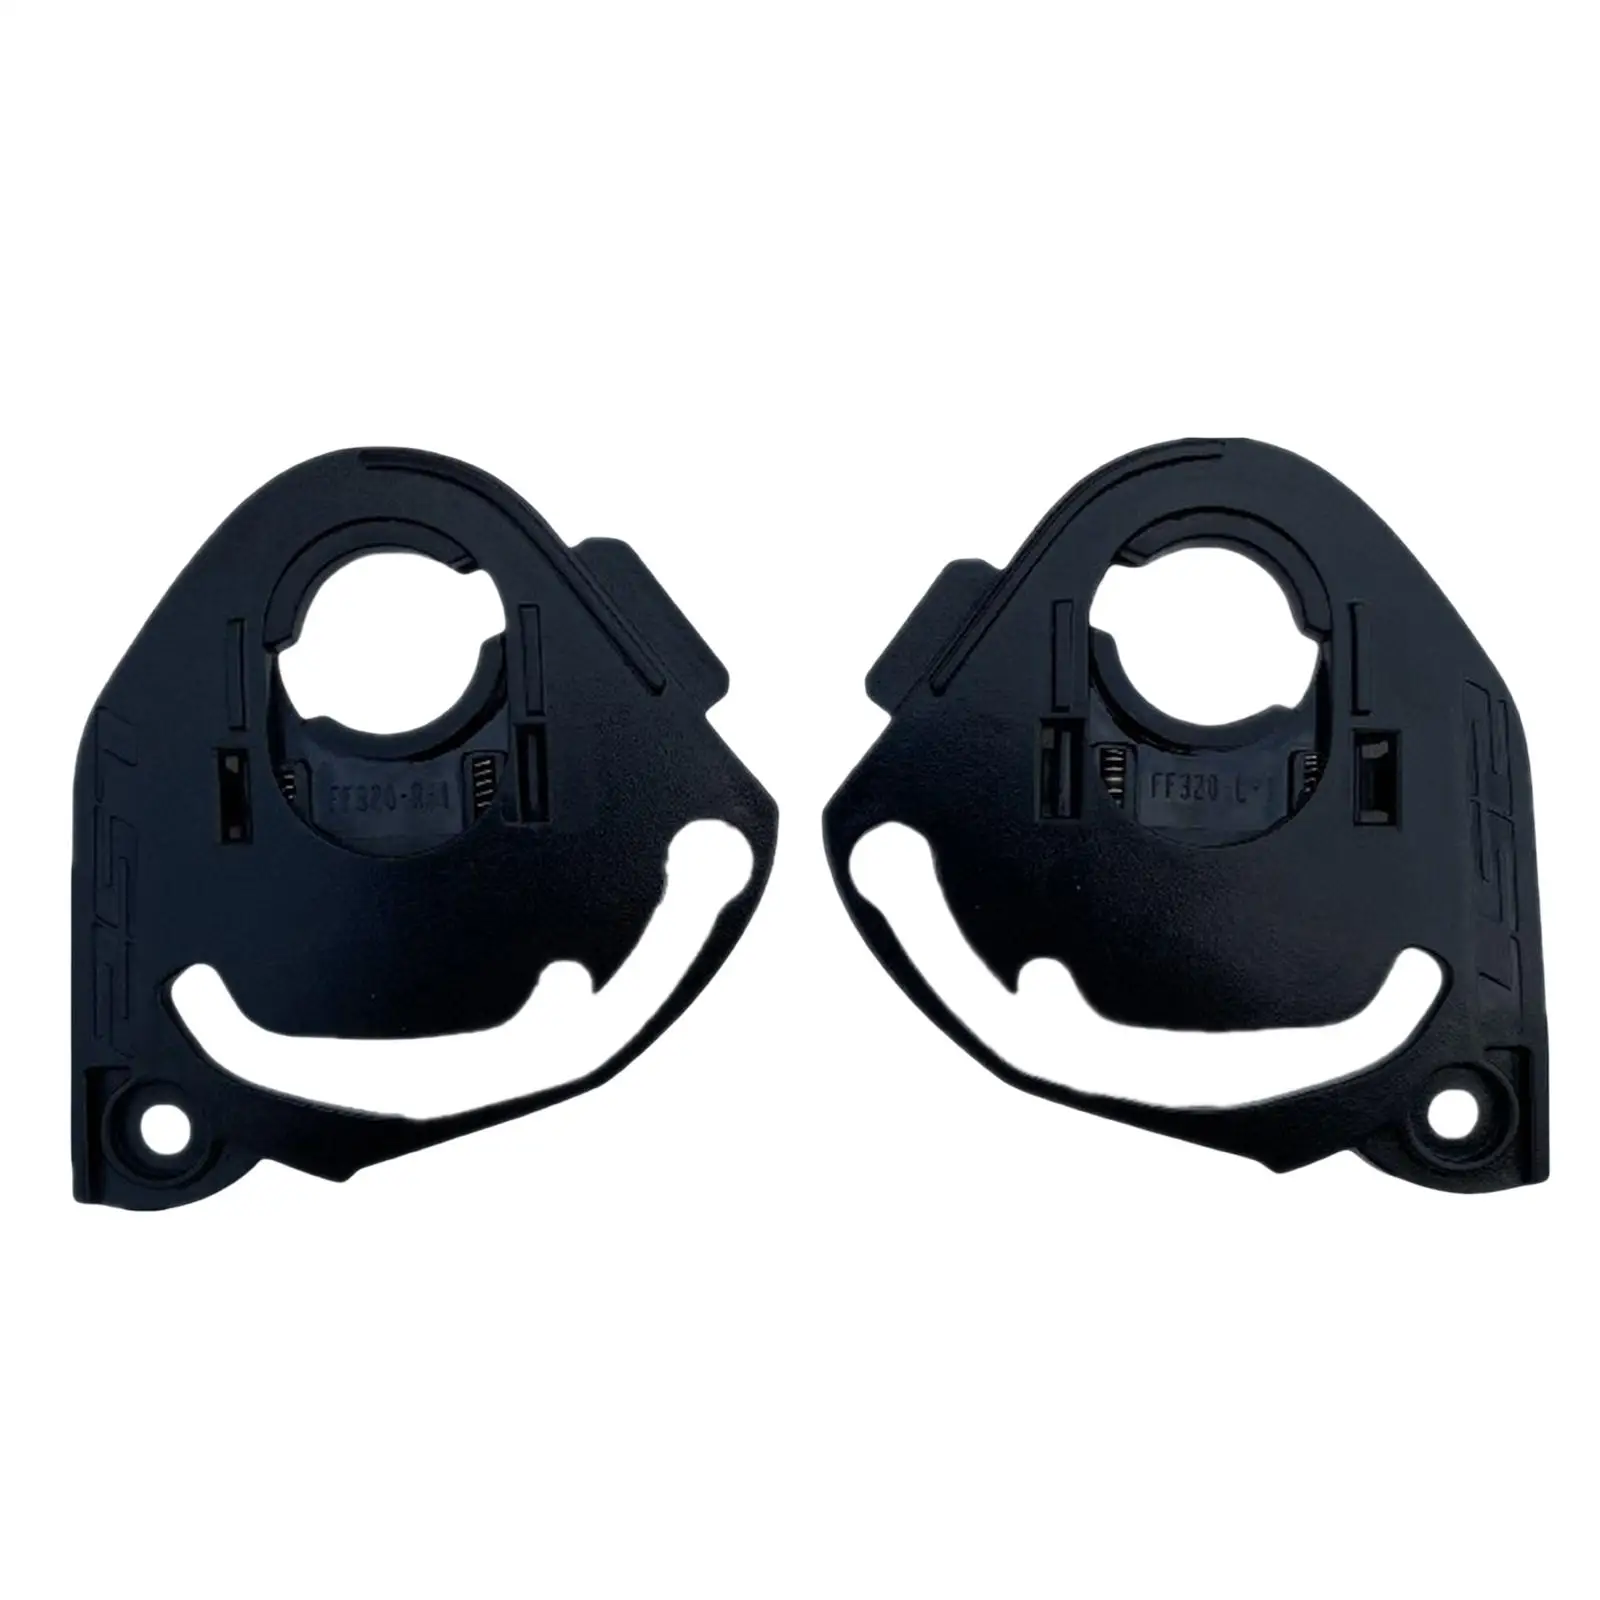 2x Motorcycles  , Replacement   Visor Mounts Fits for Ff800 Ff353 353 328 320